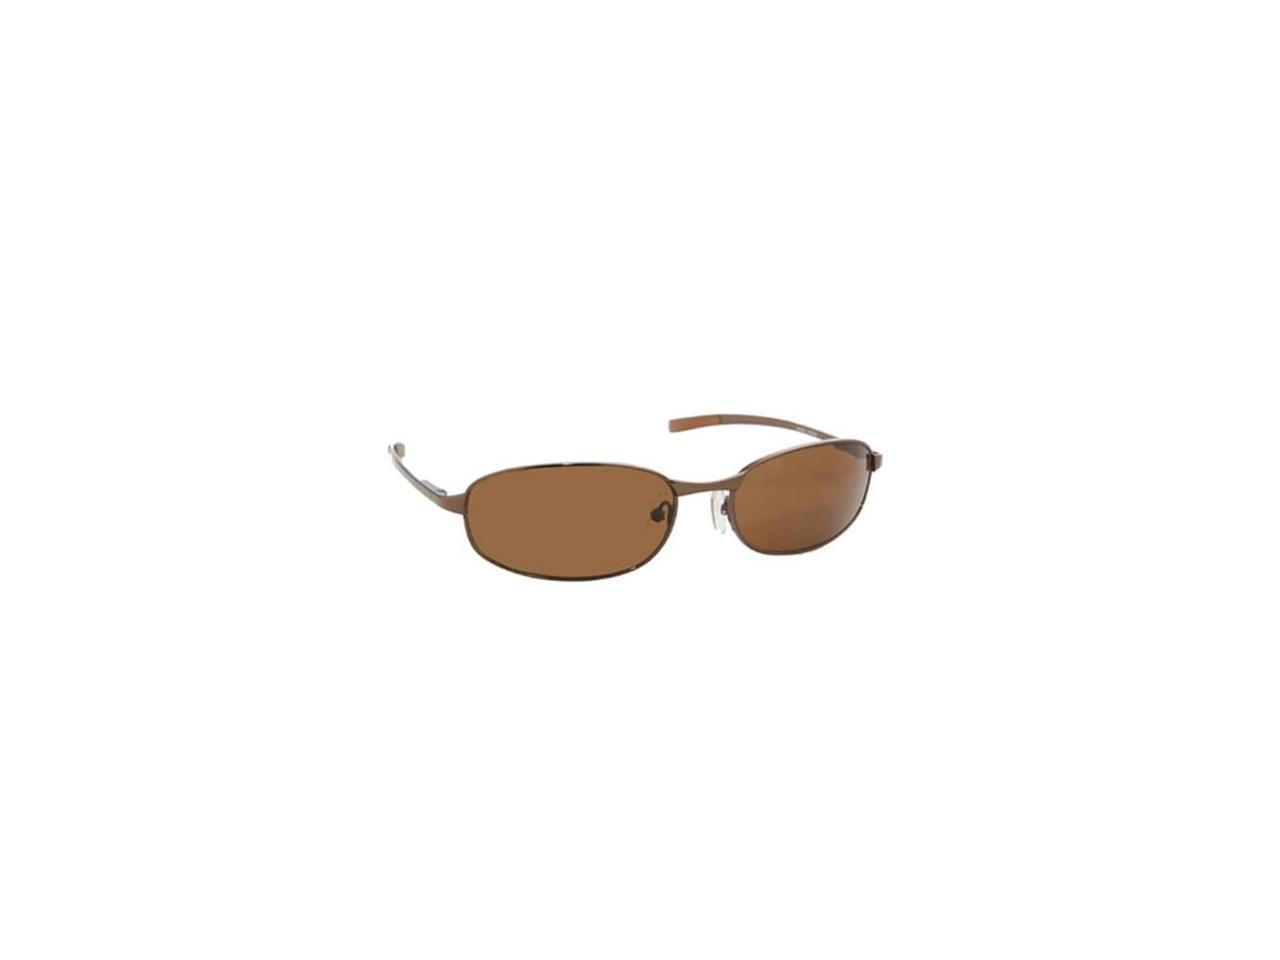 Picture of Coppermax 3710GPP BRN/AMBER Tonga Rectangle Polarized Sunglasses - Shiny Brown - Amber Lens